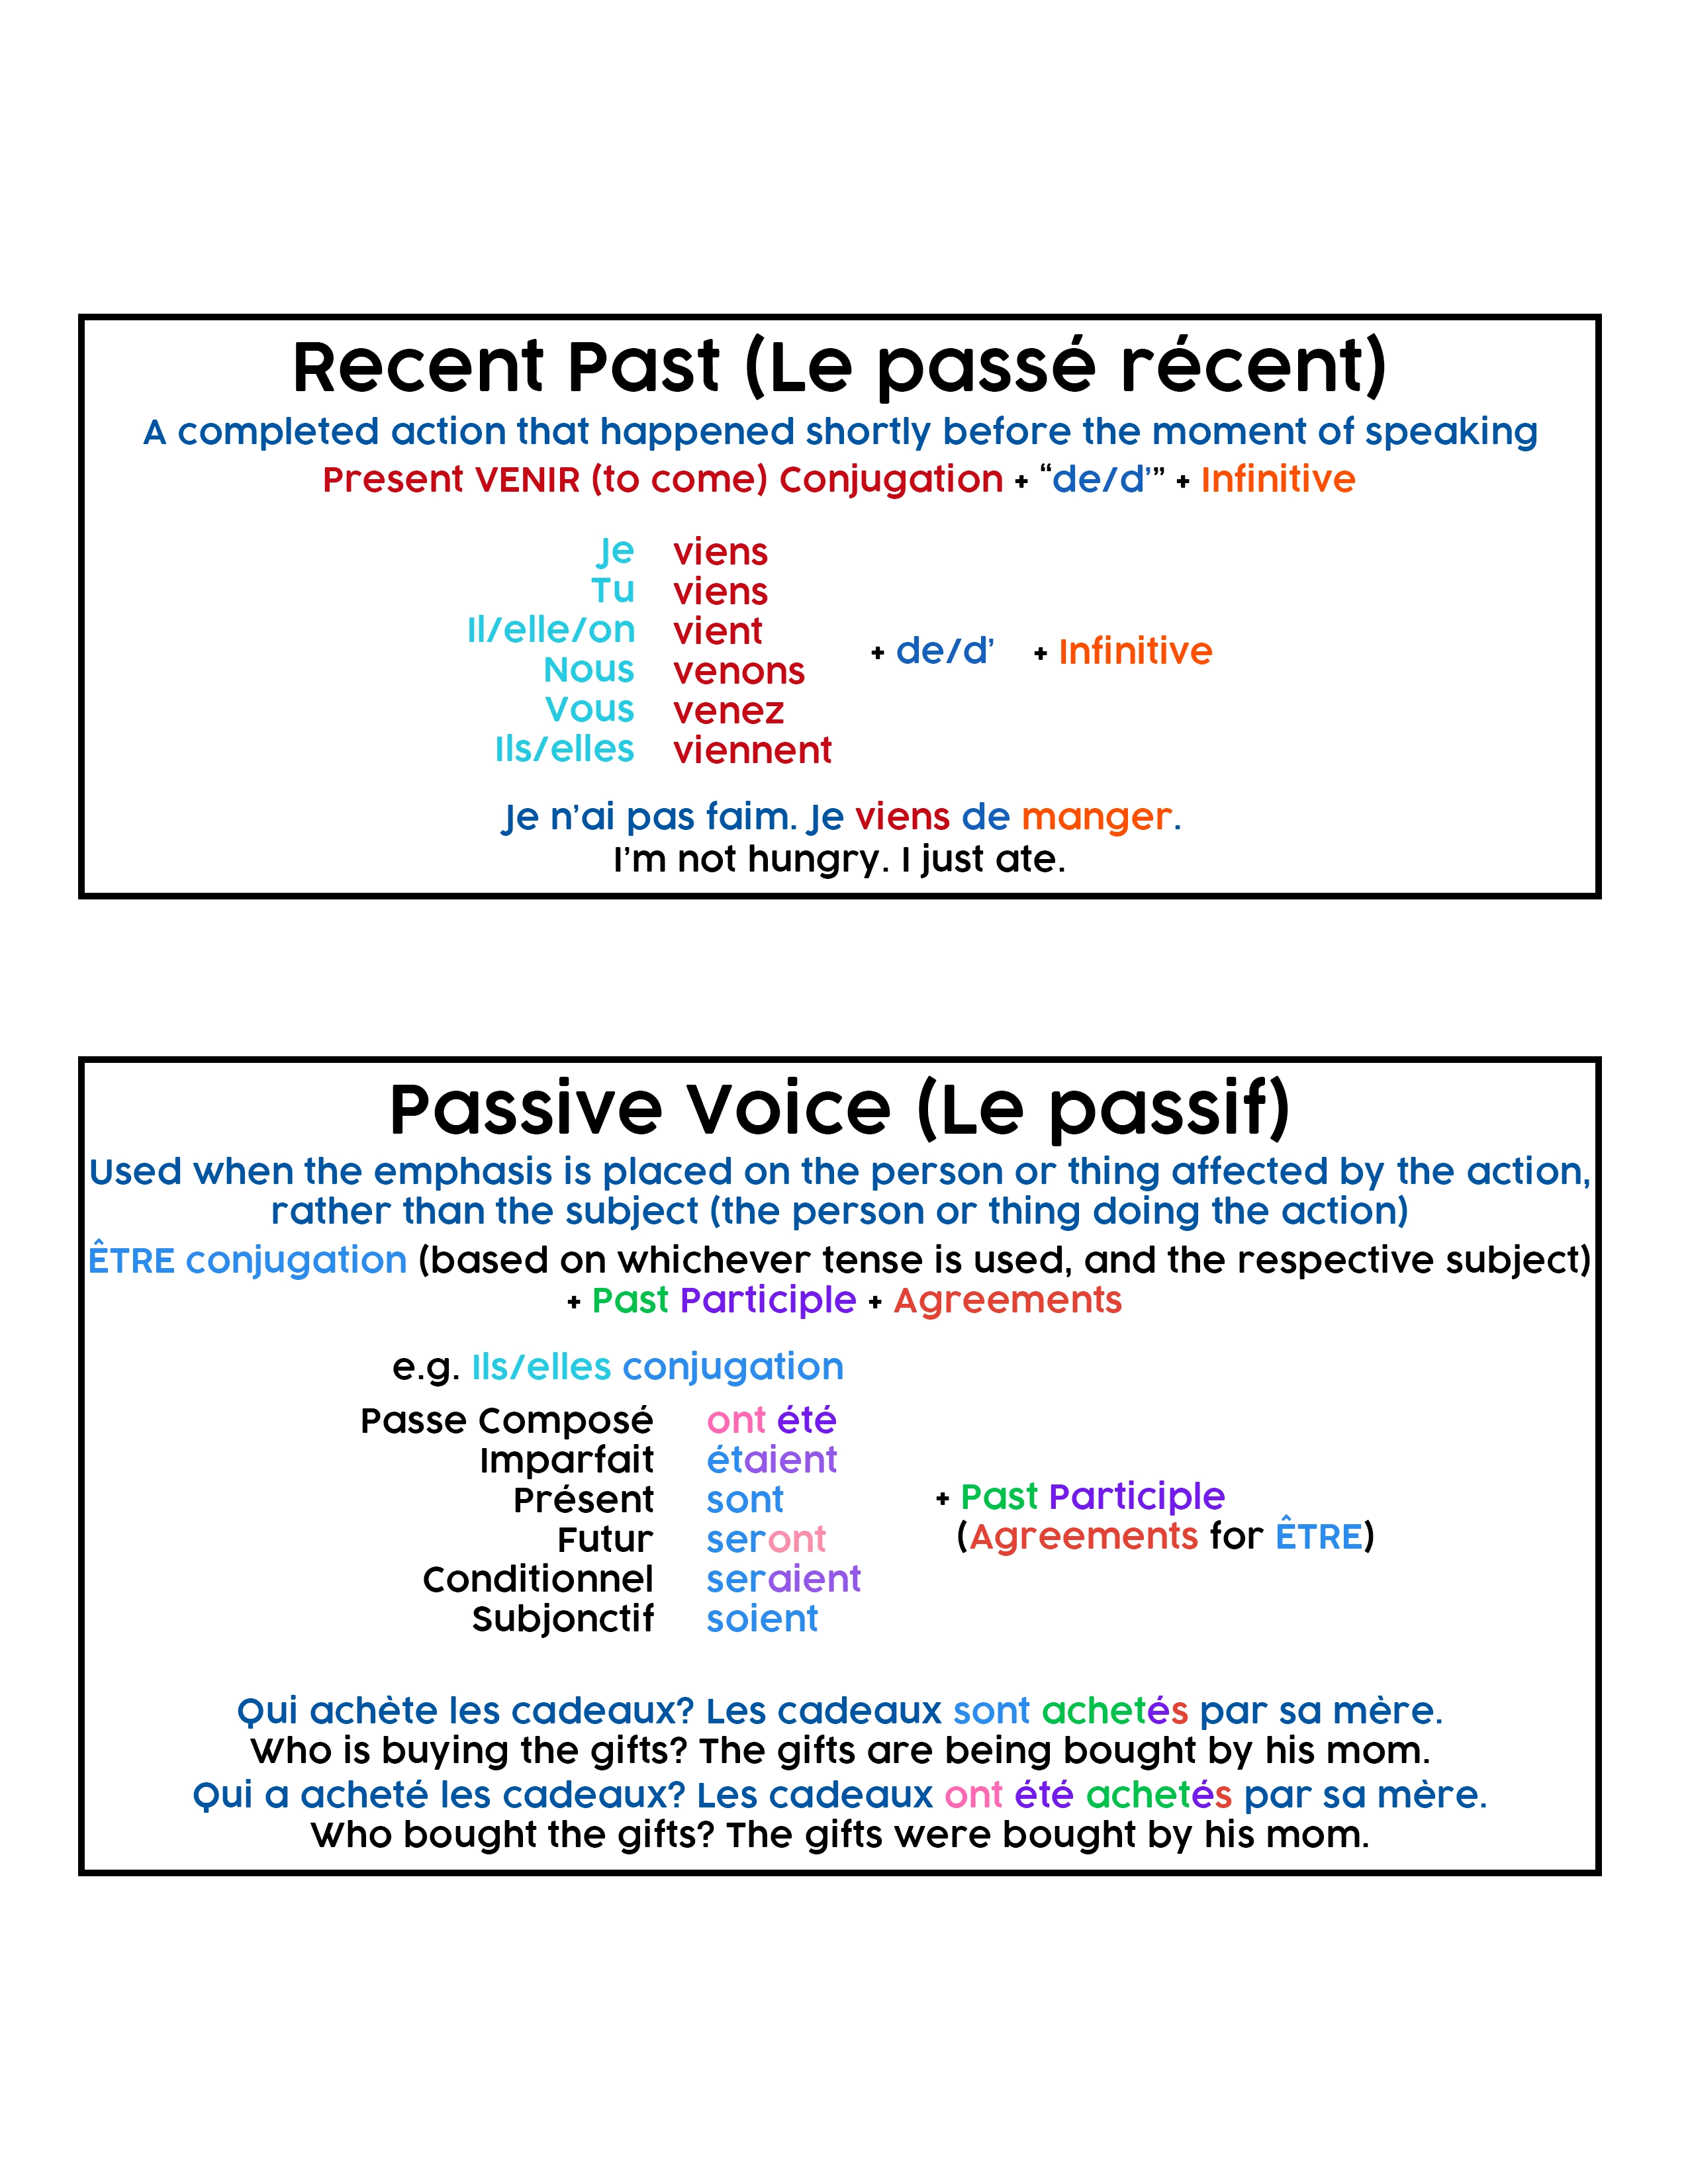 1672-french---passe-recent-passive-voice-complete-16971597084685.png